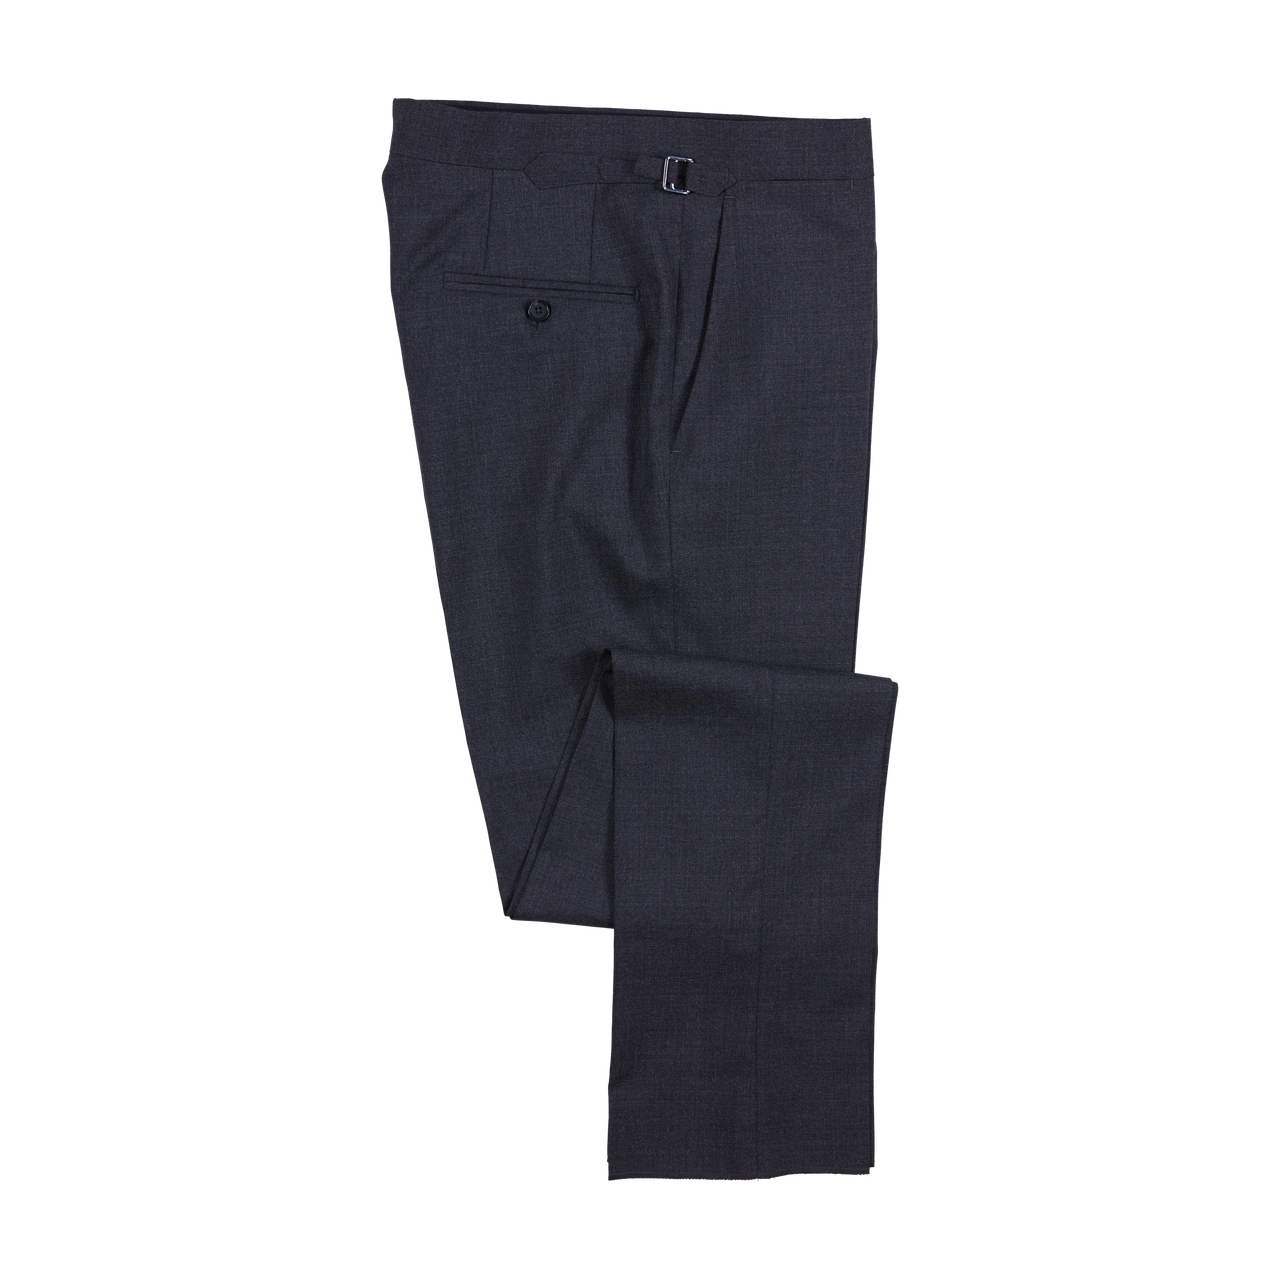 P. Johnson Trousers in Grey 3-Ply Wool